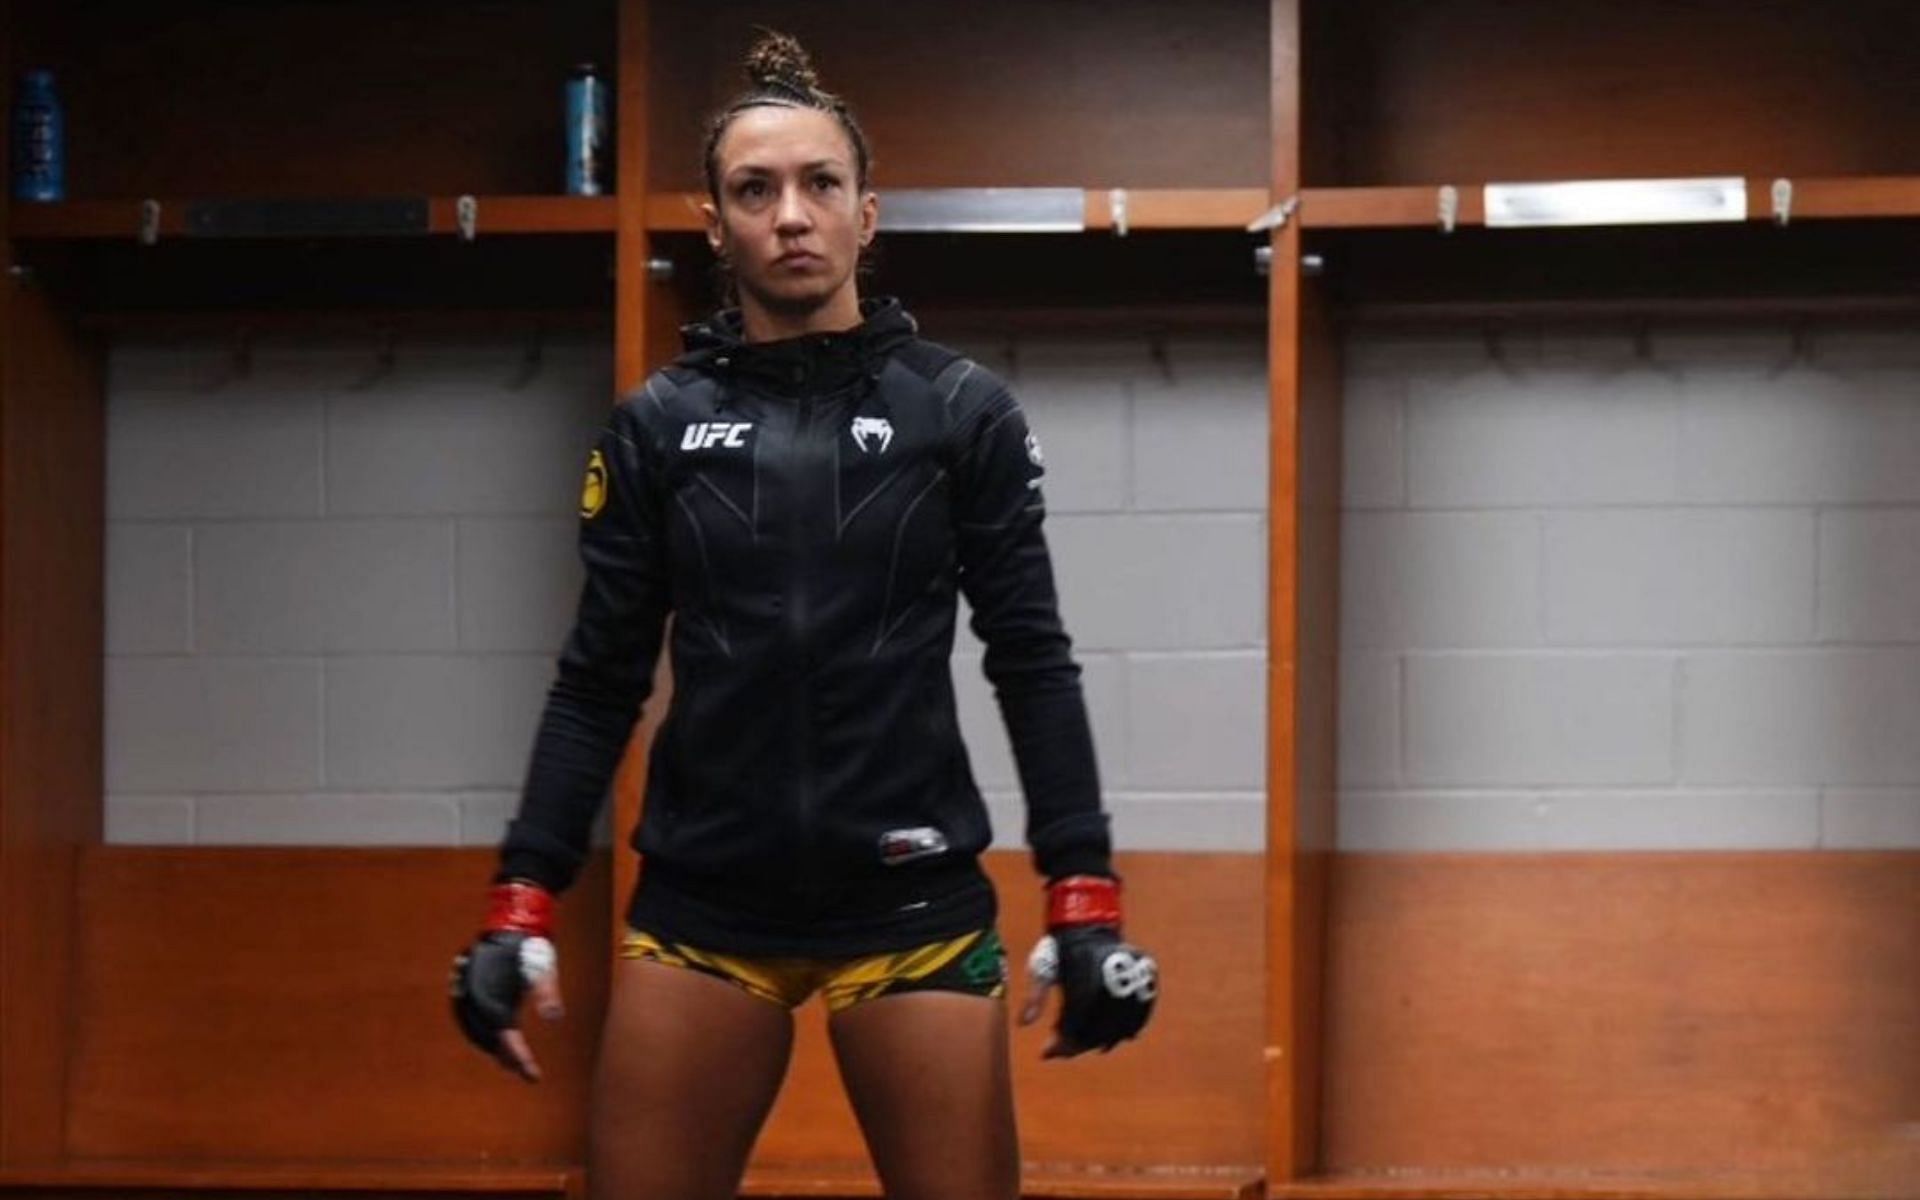 Amanda Ribas is primed to return to the octagon against a former UFC champion [Image courtesy: @amandaufcribas on Instagram]